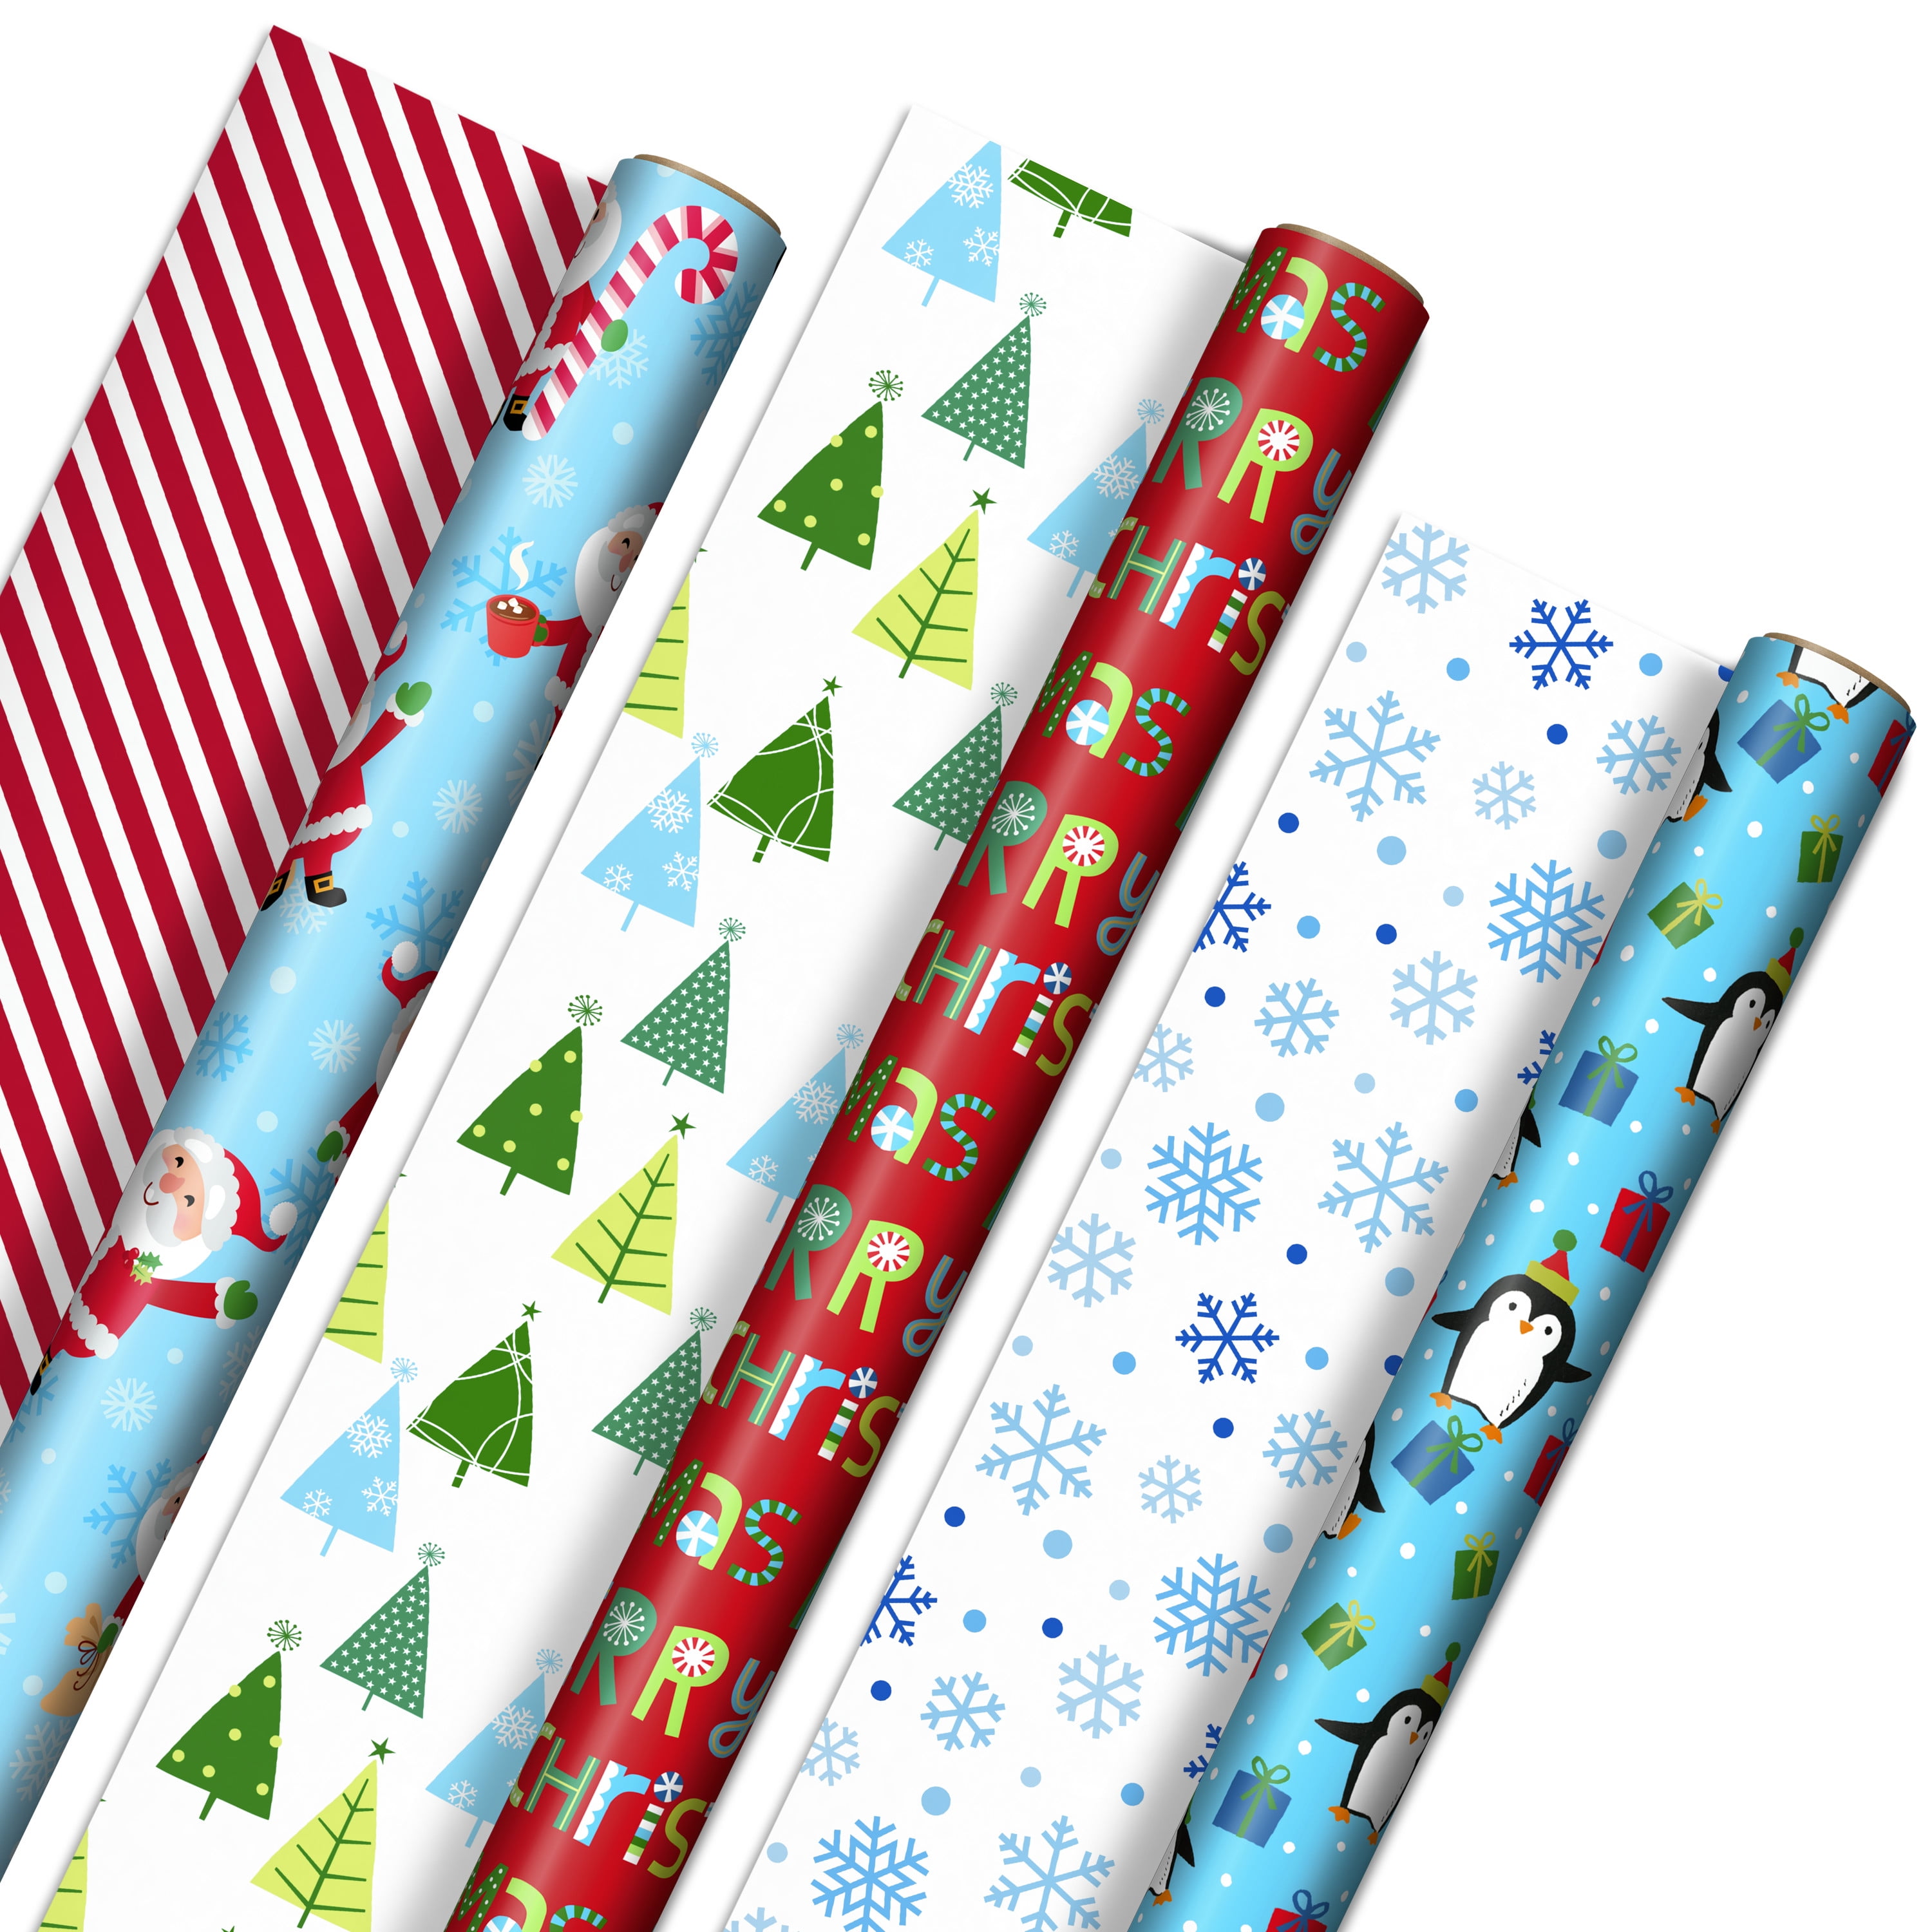  Hallmark Vintage Christmas Wrapping Paper Cut Lines on Reverse  (3 Rolls: 120 sq. ft. ttl) Dancing Santas, Classic Snowman, Merry, Jolly,  Happy, Peace : Health & Household